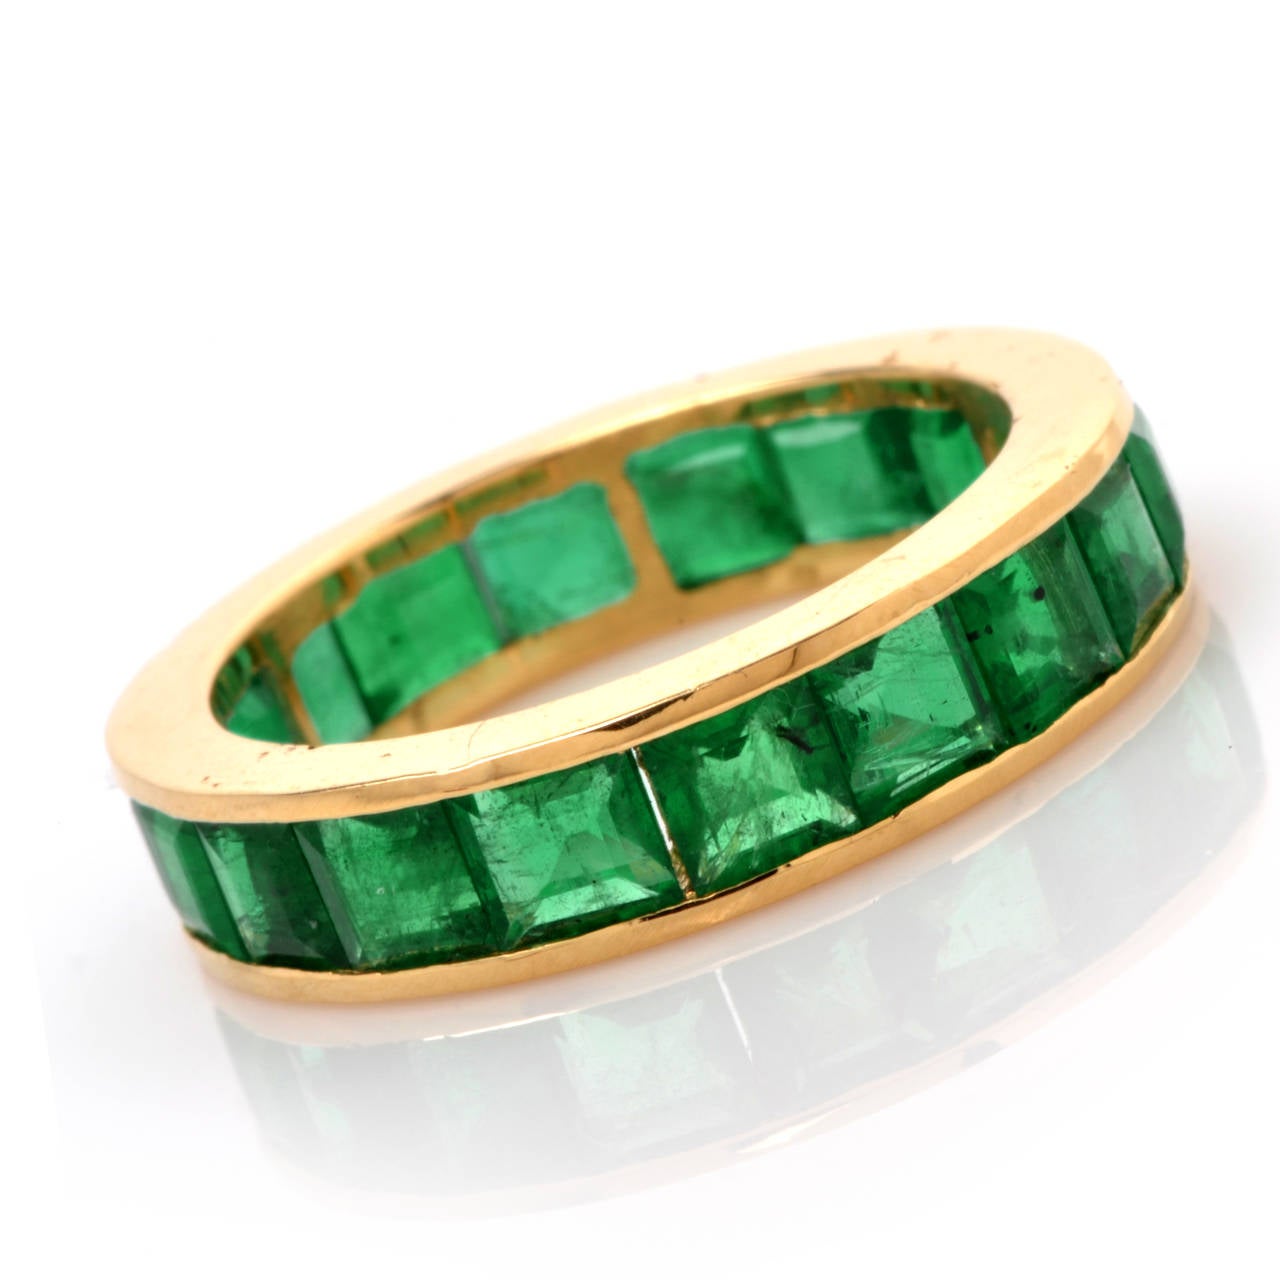 This eternity band with genuine square-cut Colombian emeralds is crafted in  solid 18K yellow gold and weighs 3.8 grams. In elegantly simple style, this vividly colored eternity band is adorned throughout with   channel-set square-cut genuine